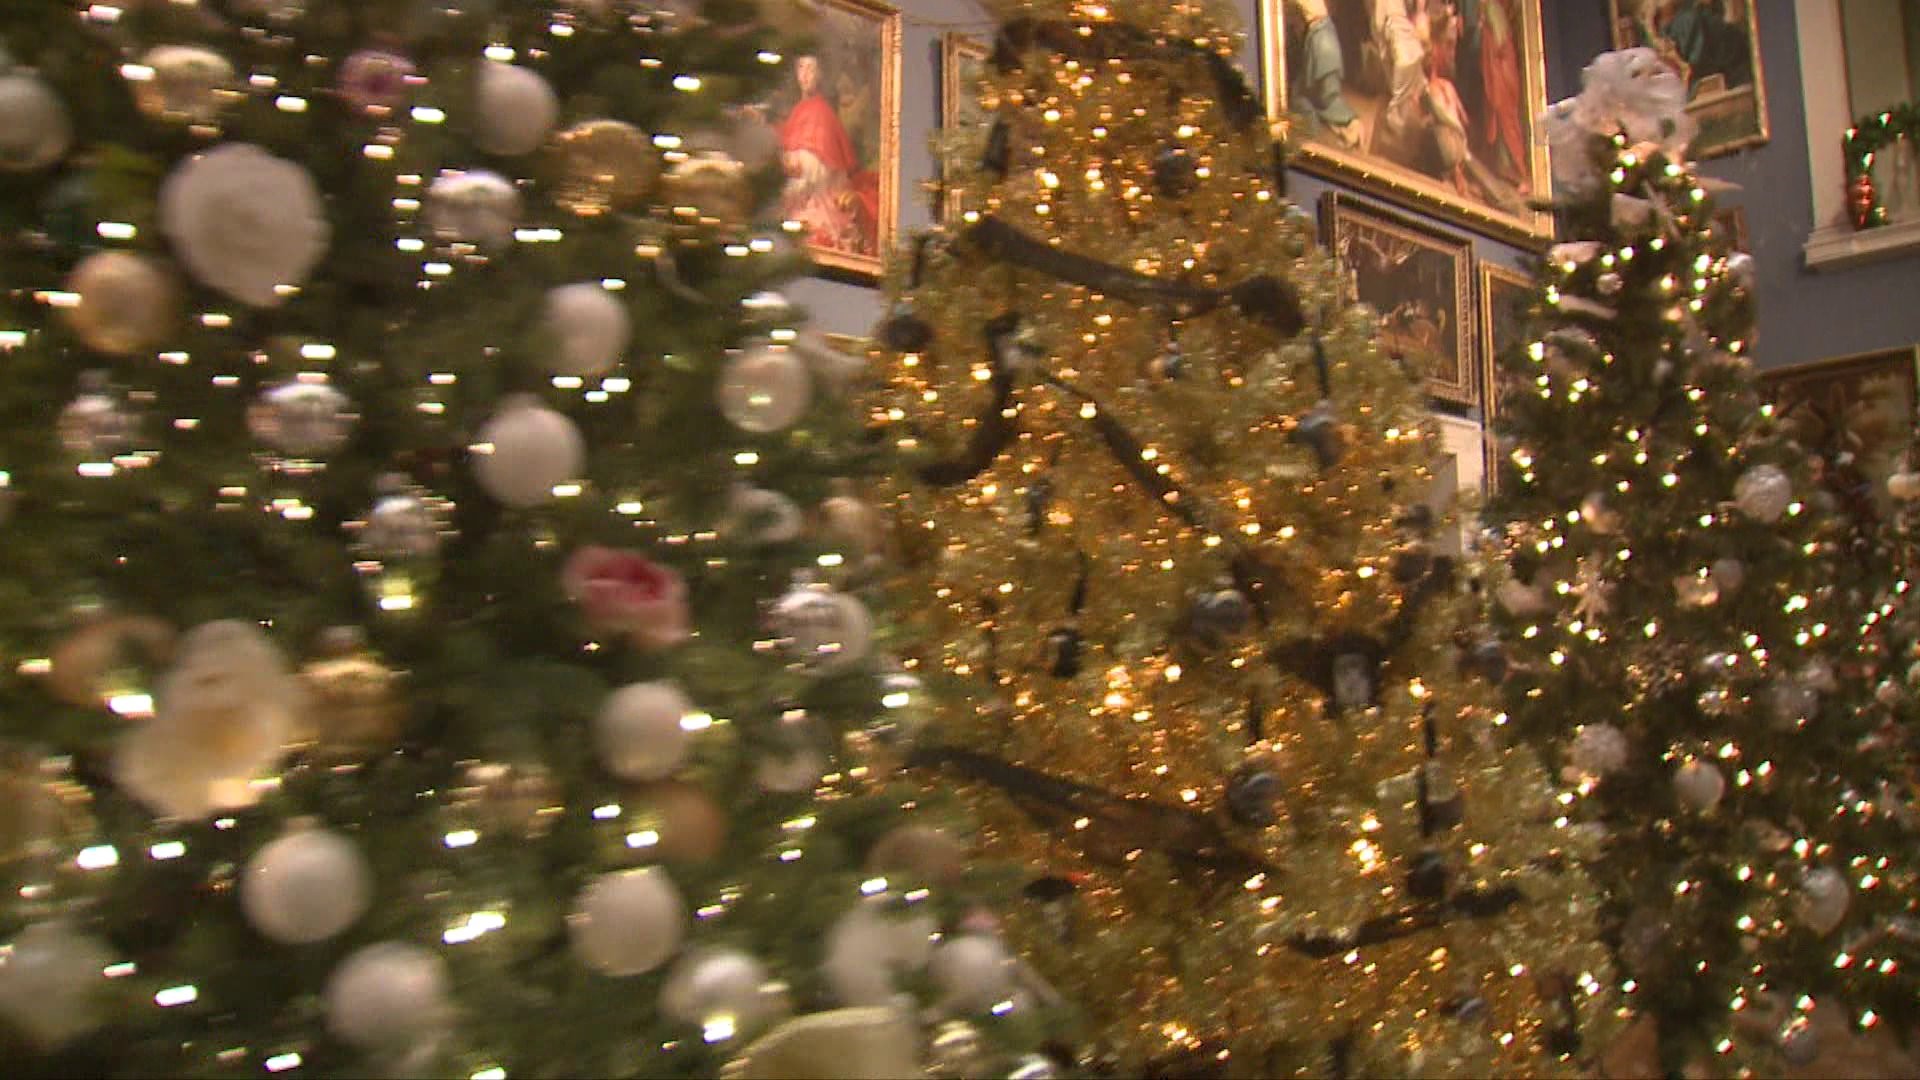 Wadsworth Atheneum displays more than 100 trees at festival of trees